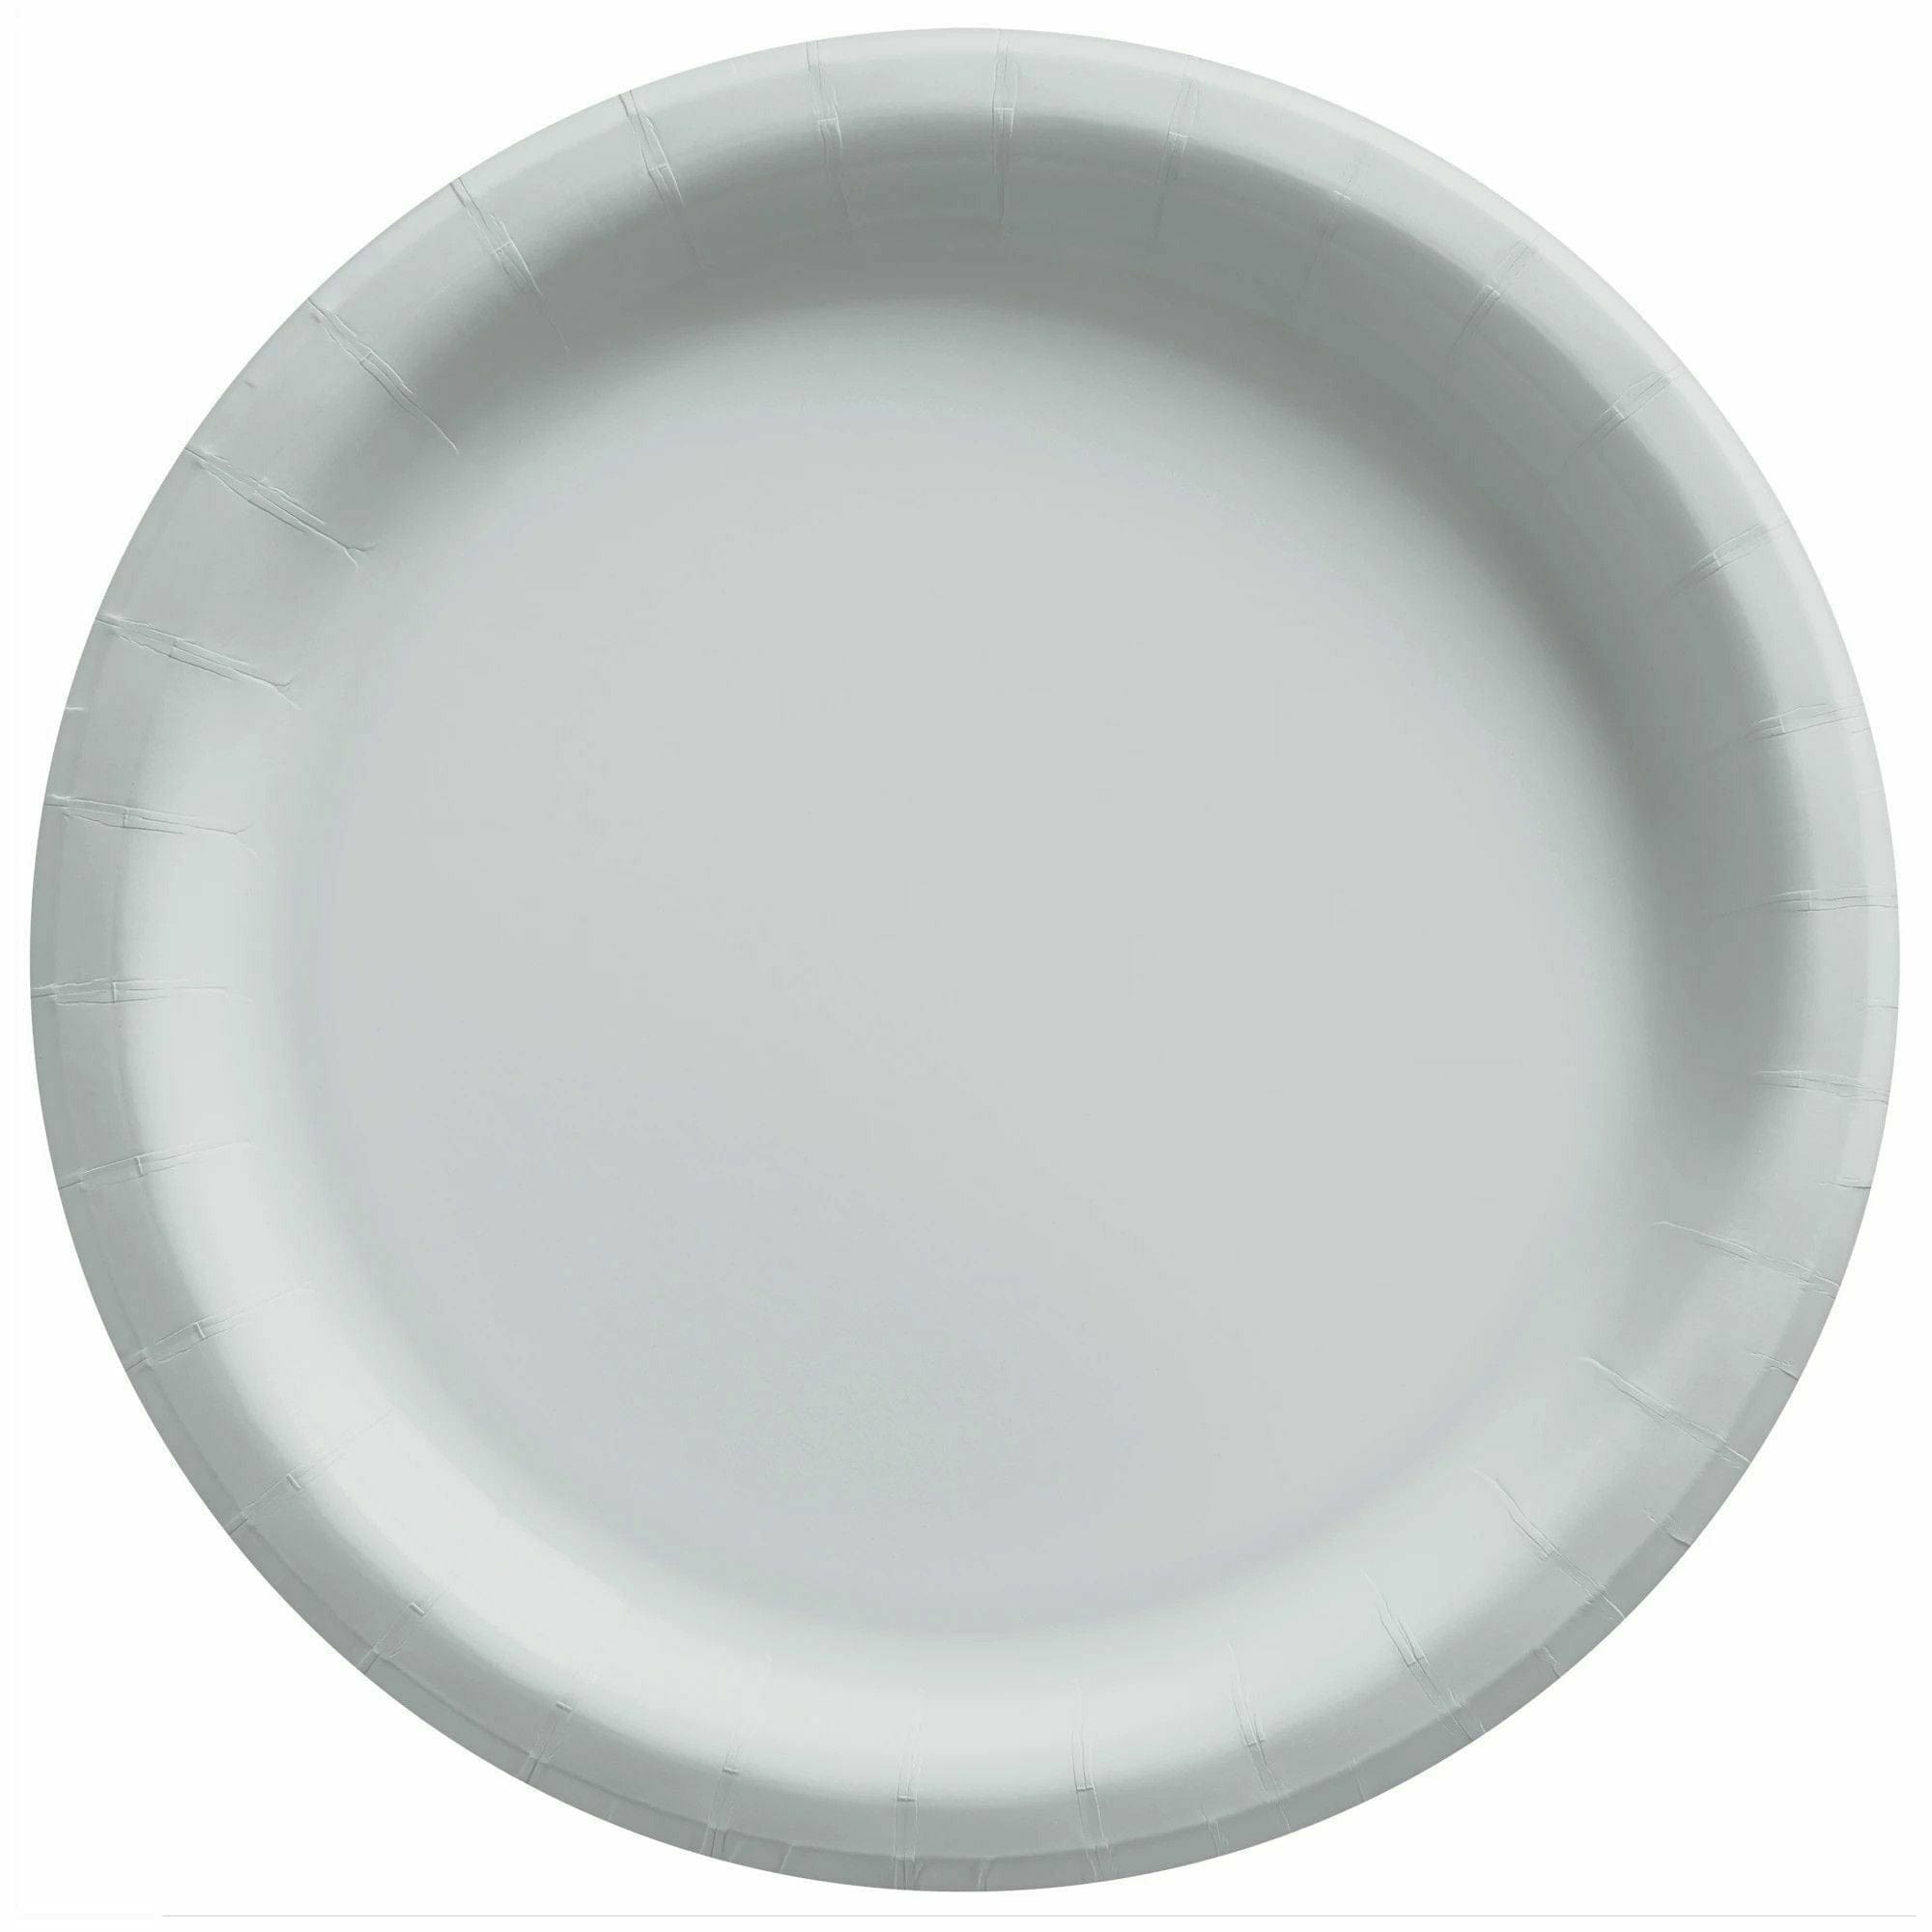 Amscan BASIC Silver - 8 1/2" Round Paper Plates, 20 Ct.